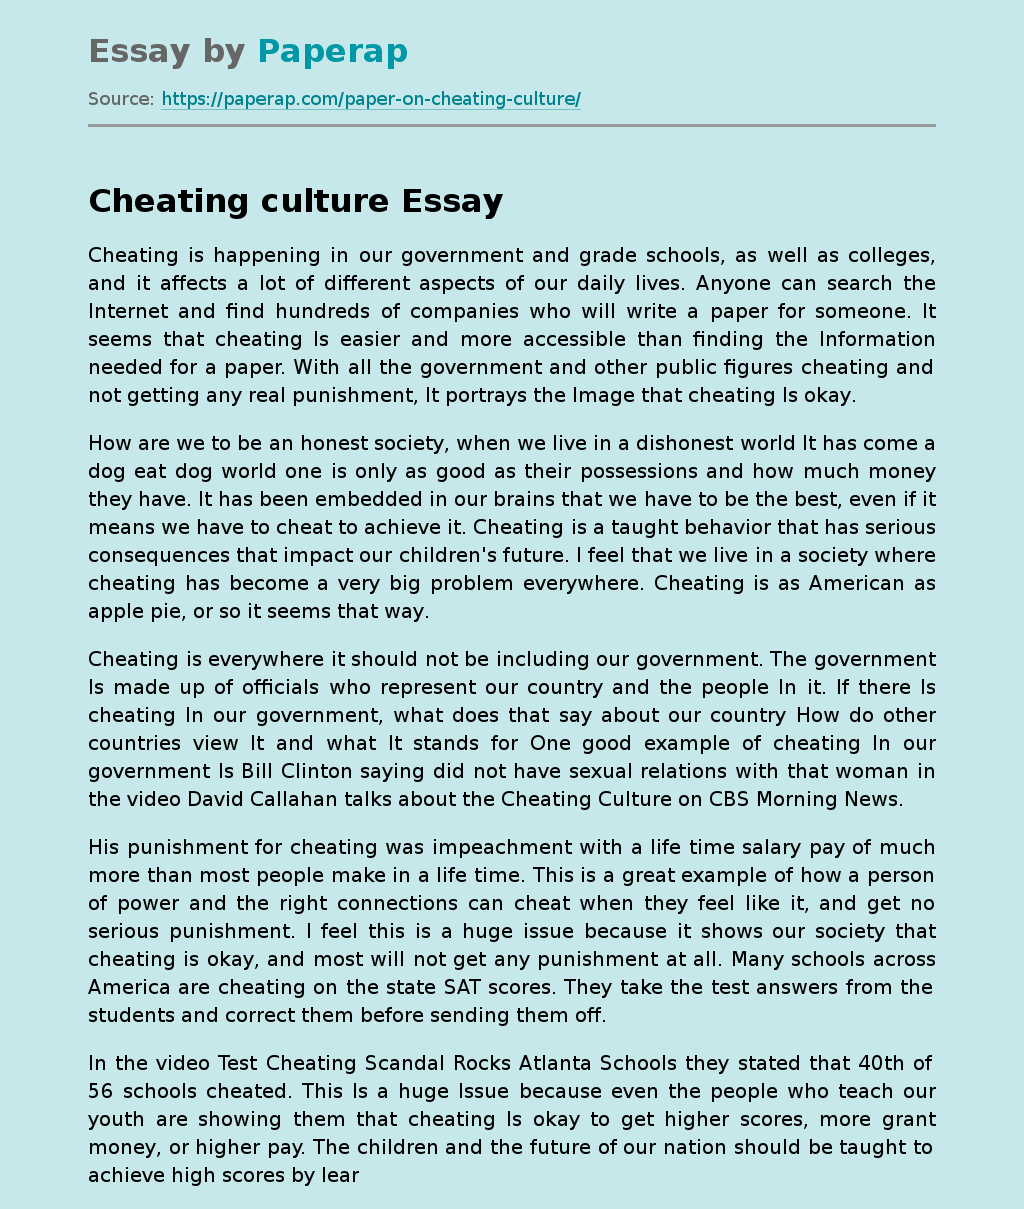 Cheating culture